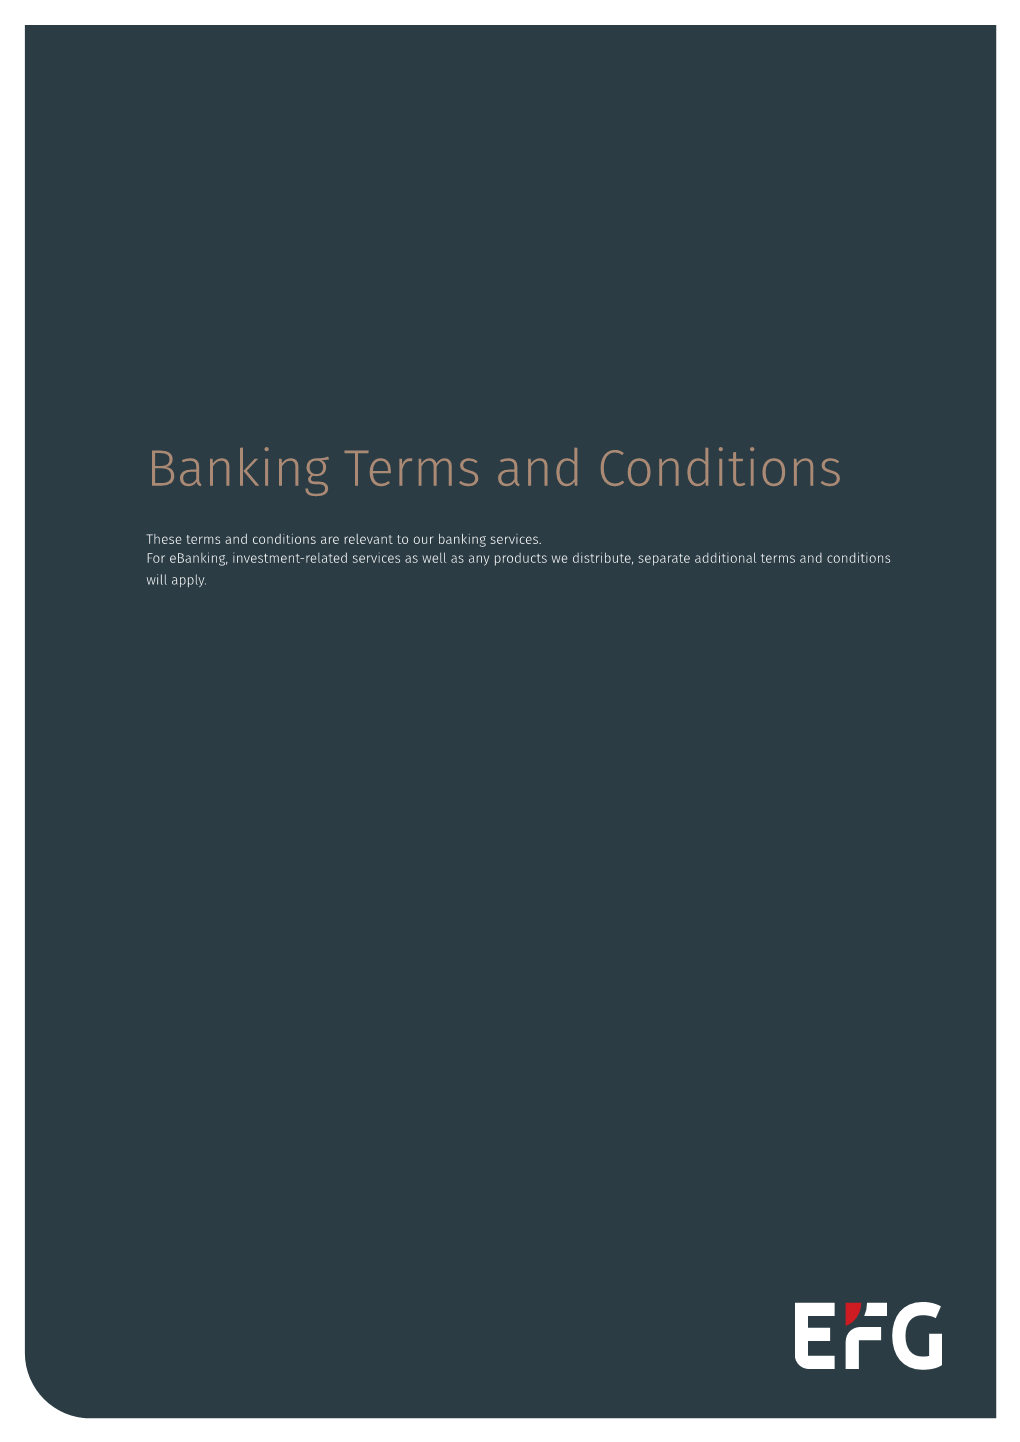 Banking Terms and Conditions